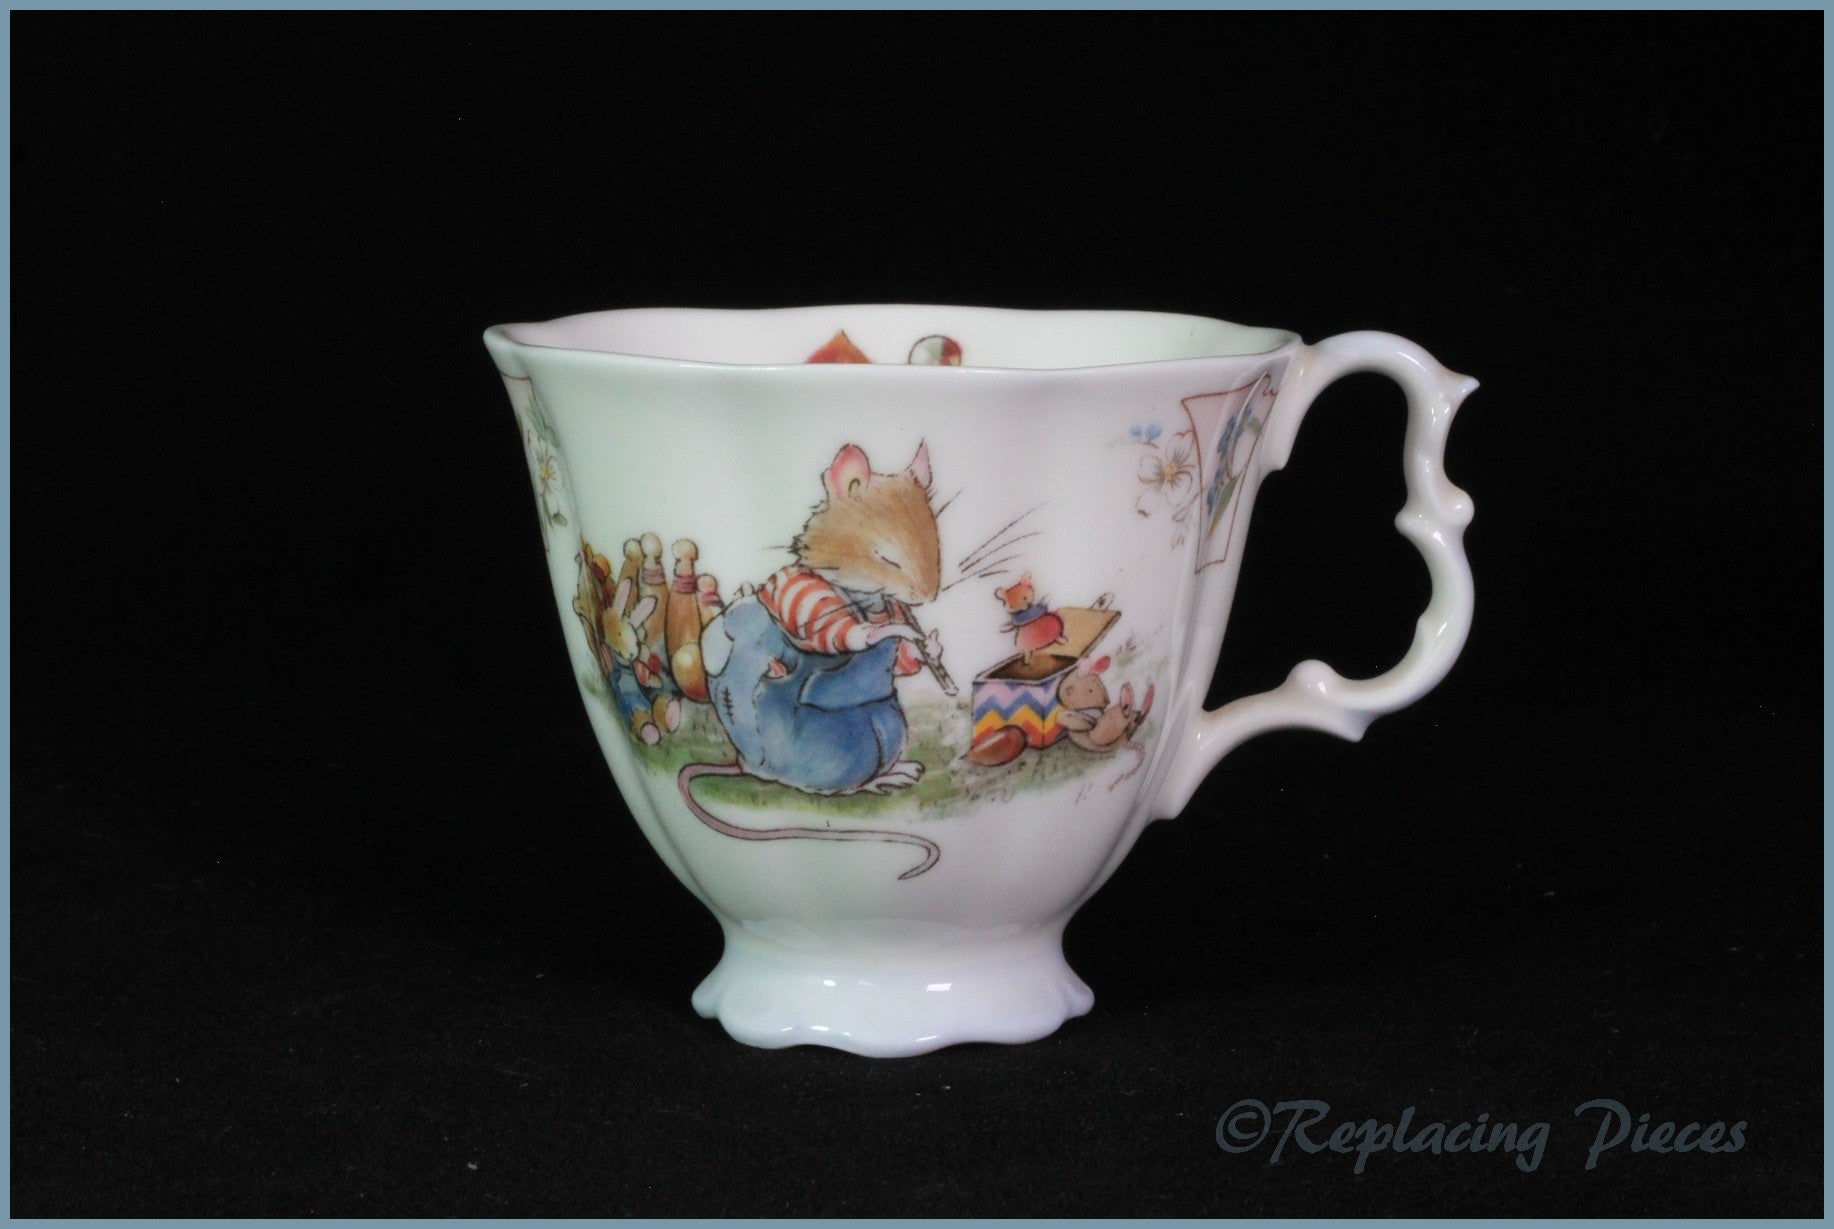 Royal Doulton - Brambly Hedge - Small Teacup (The Birthday)